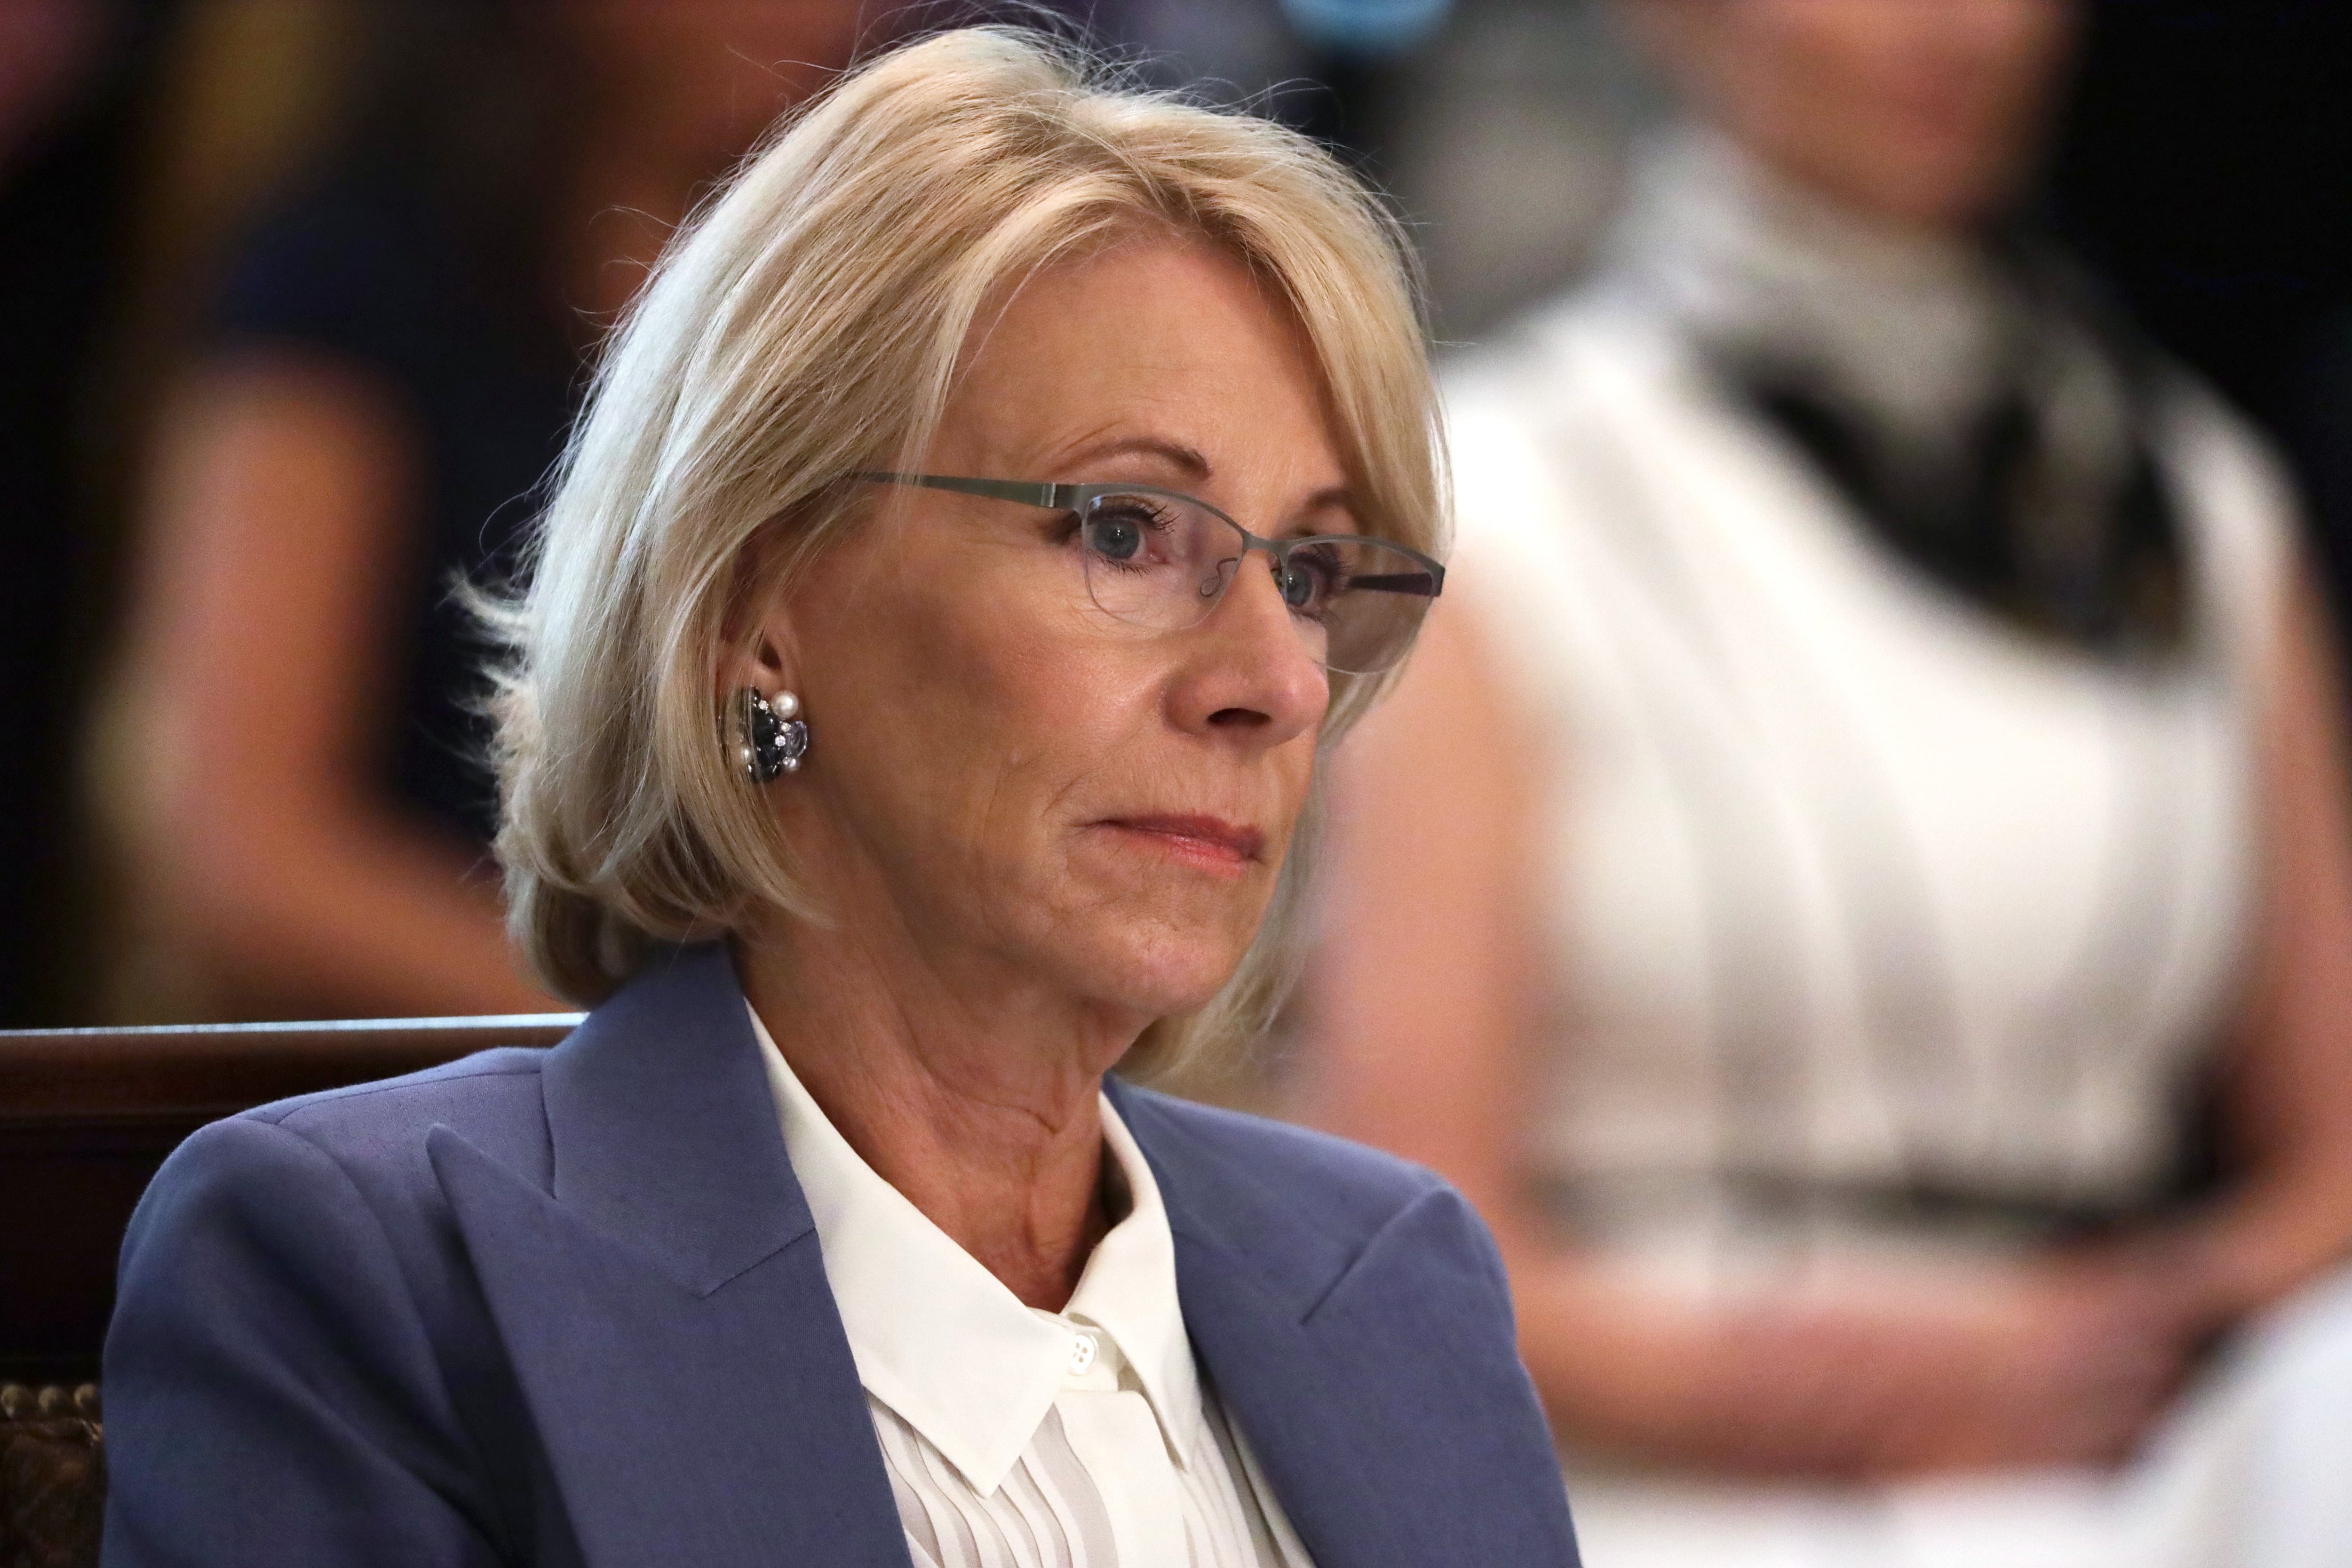 Betsy DeVos stares off in front of her, wearing glasses and a blue jacket.